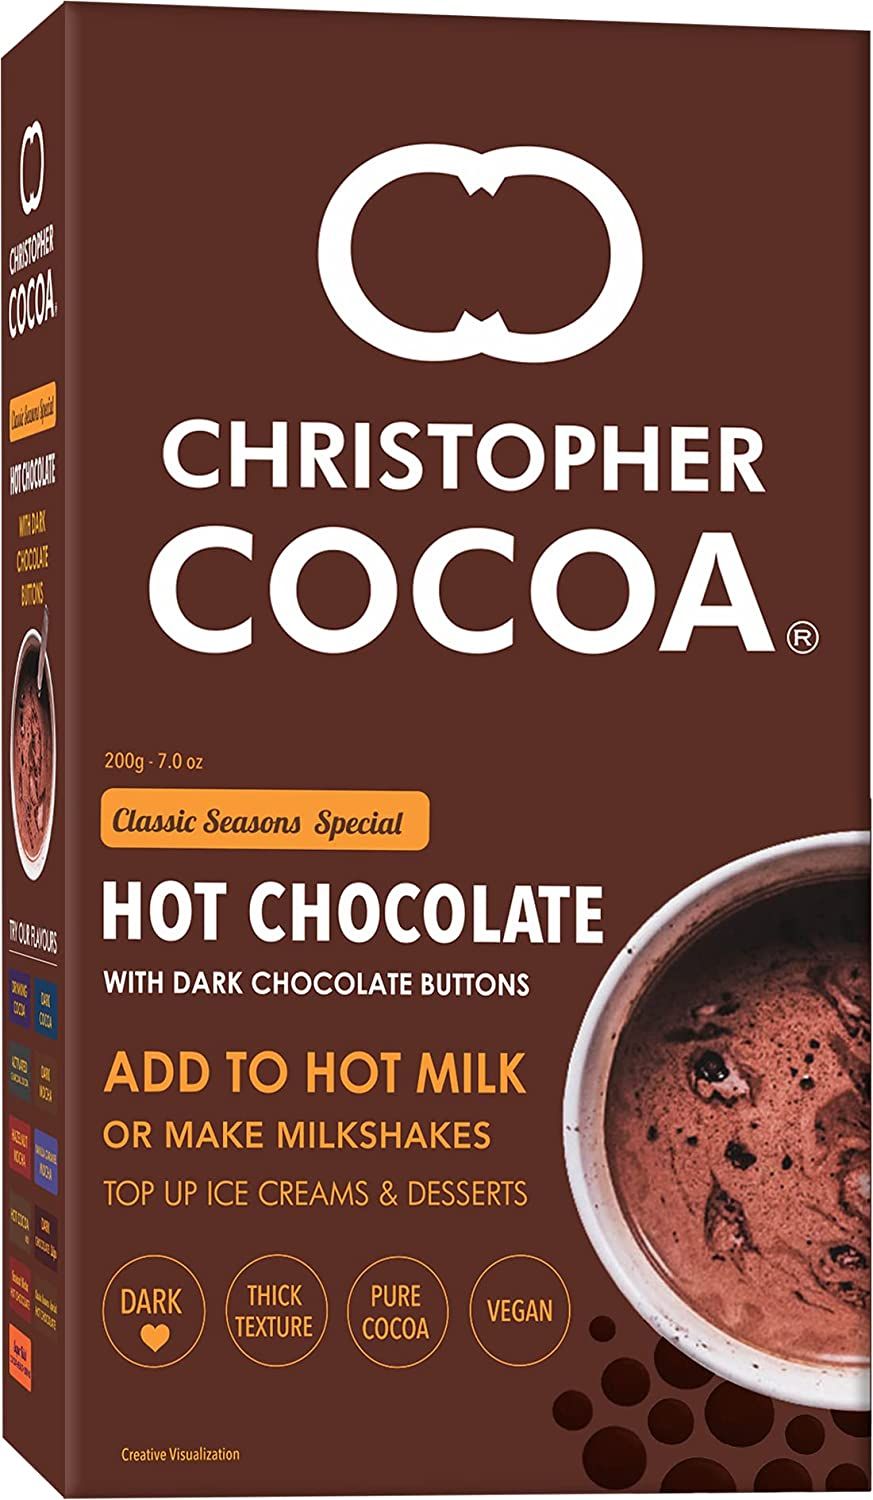 Christopher Cocoa Hot Chocolate Image